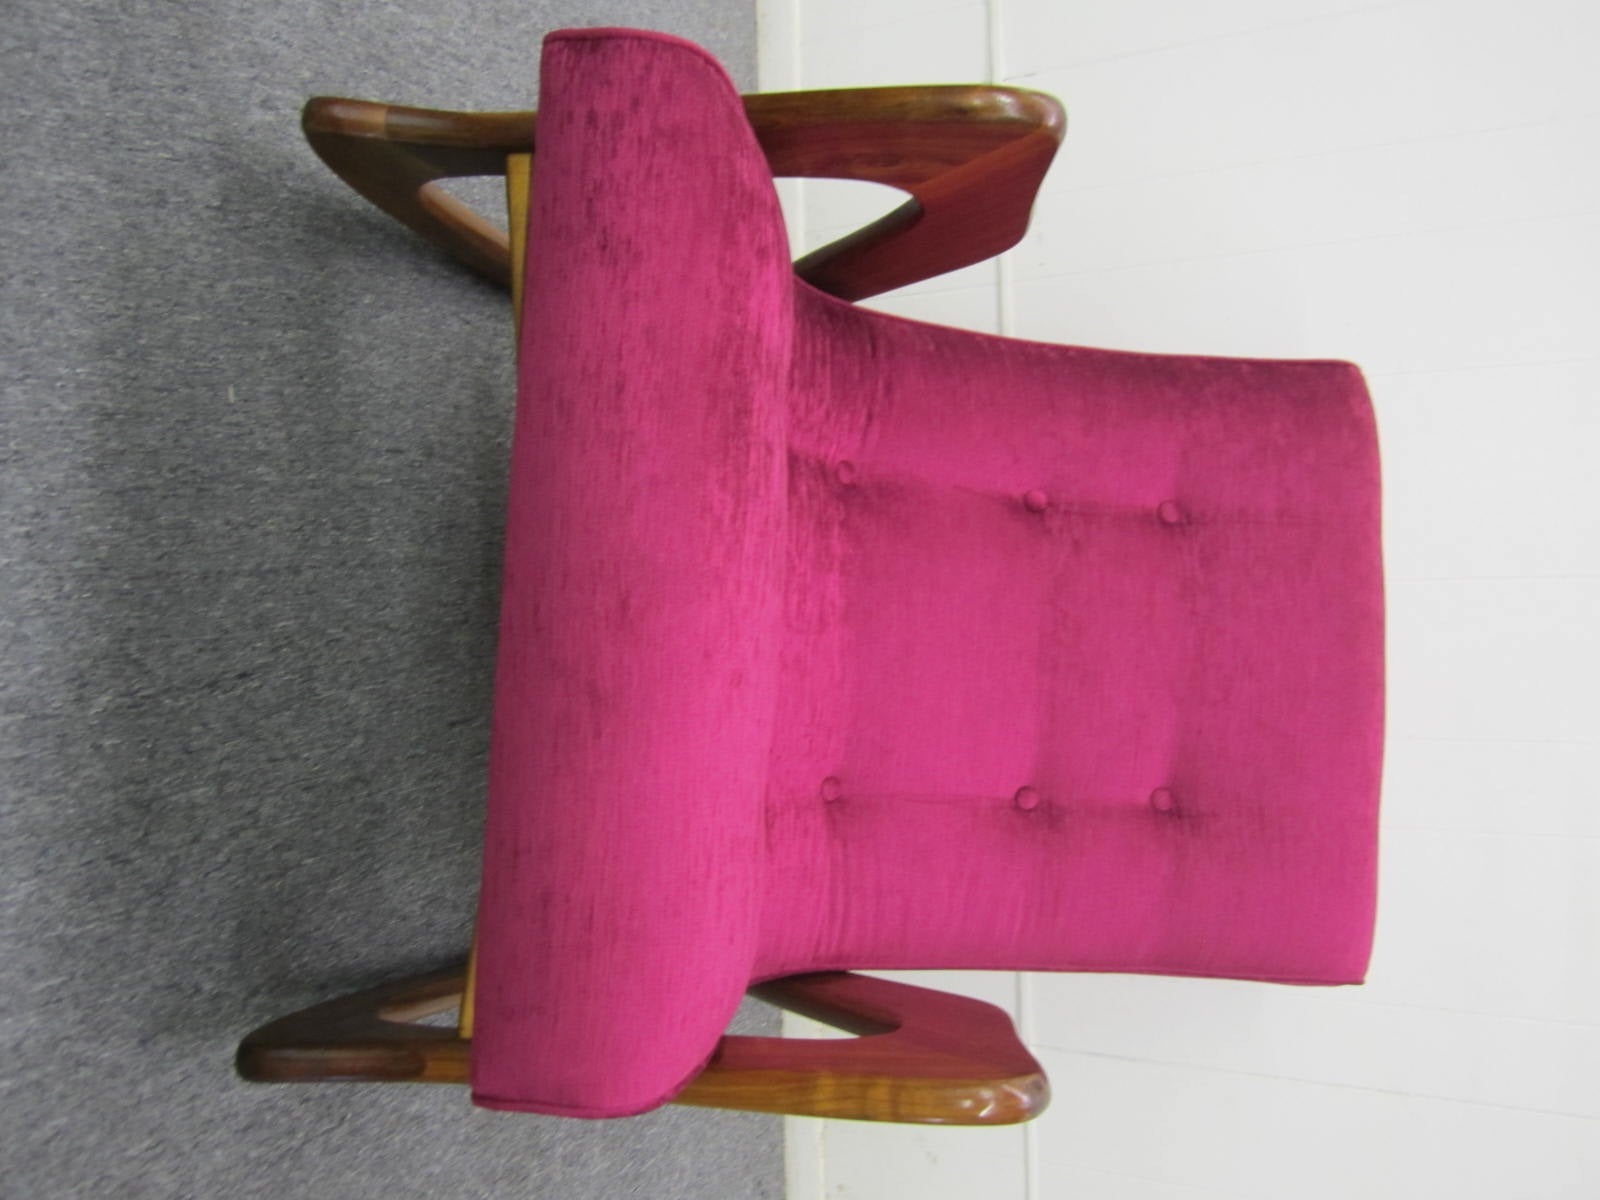 Mid-20th Century Adrian Pearsall Sculptural Rocking Chair for Craft Associates Mid-Century Modern